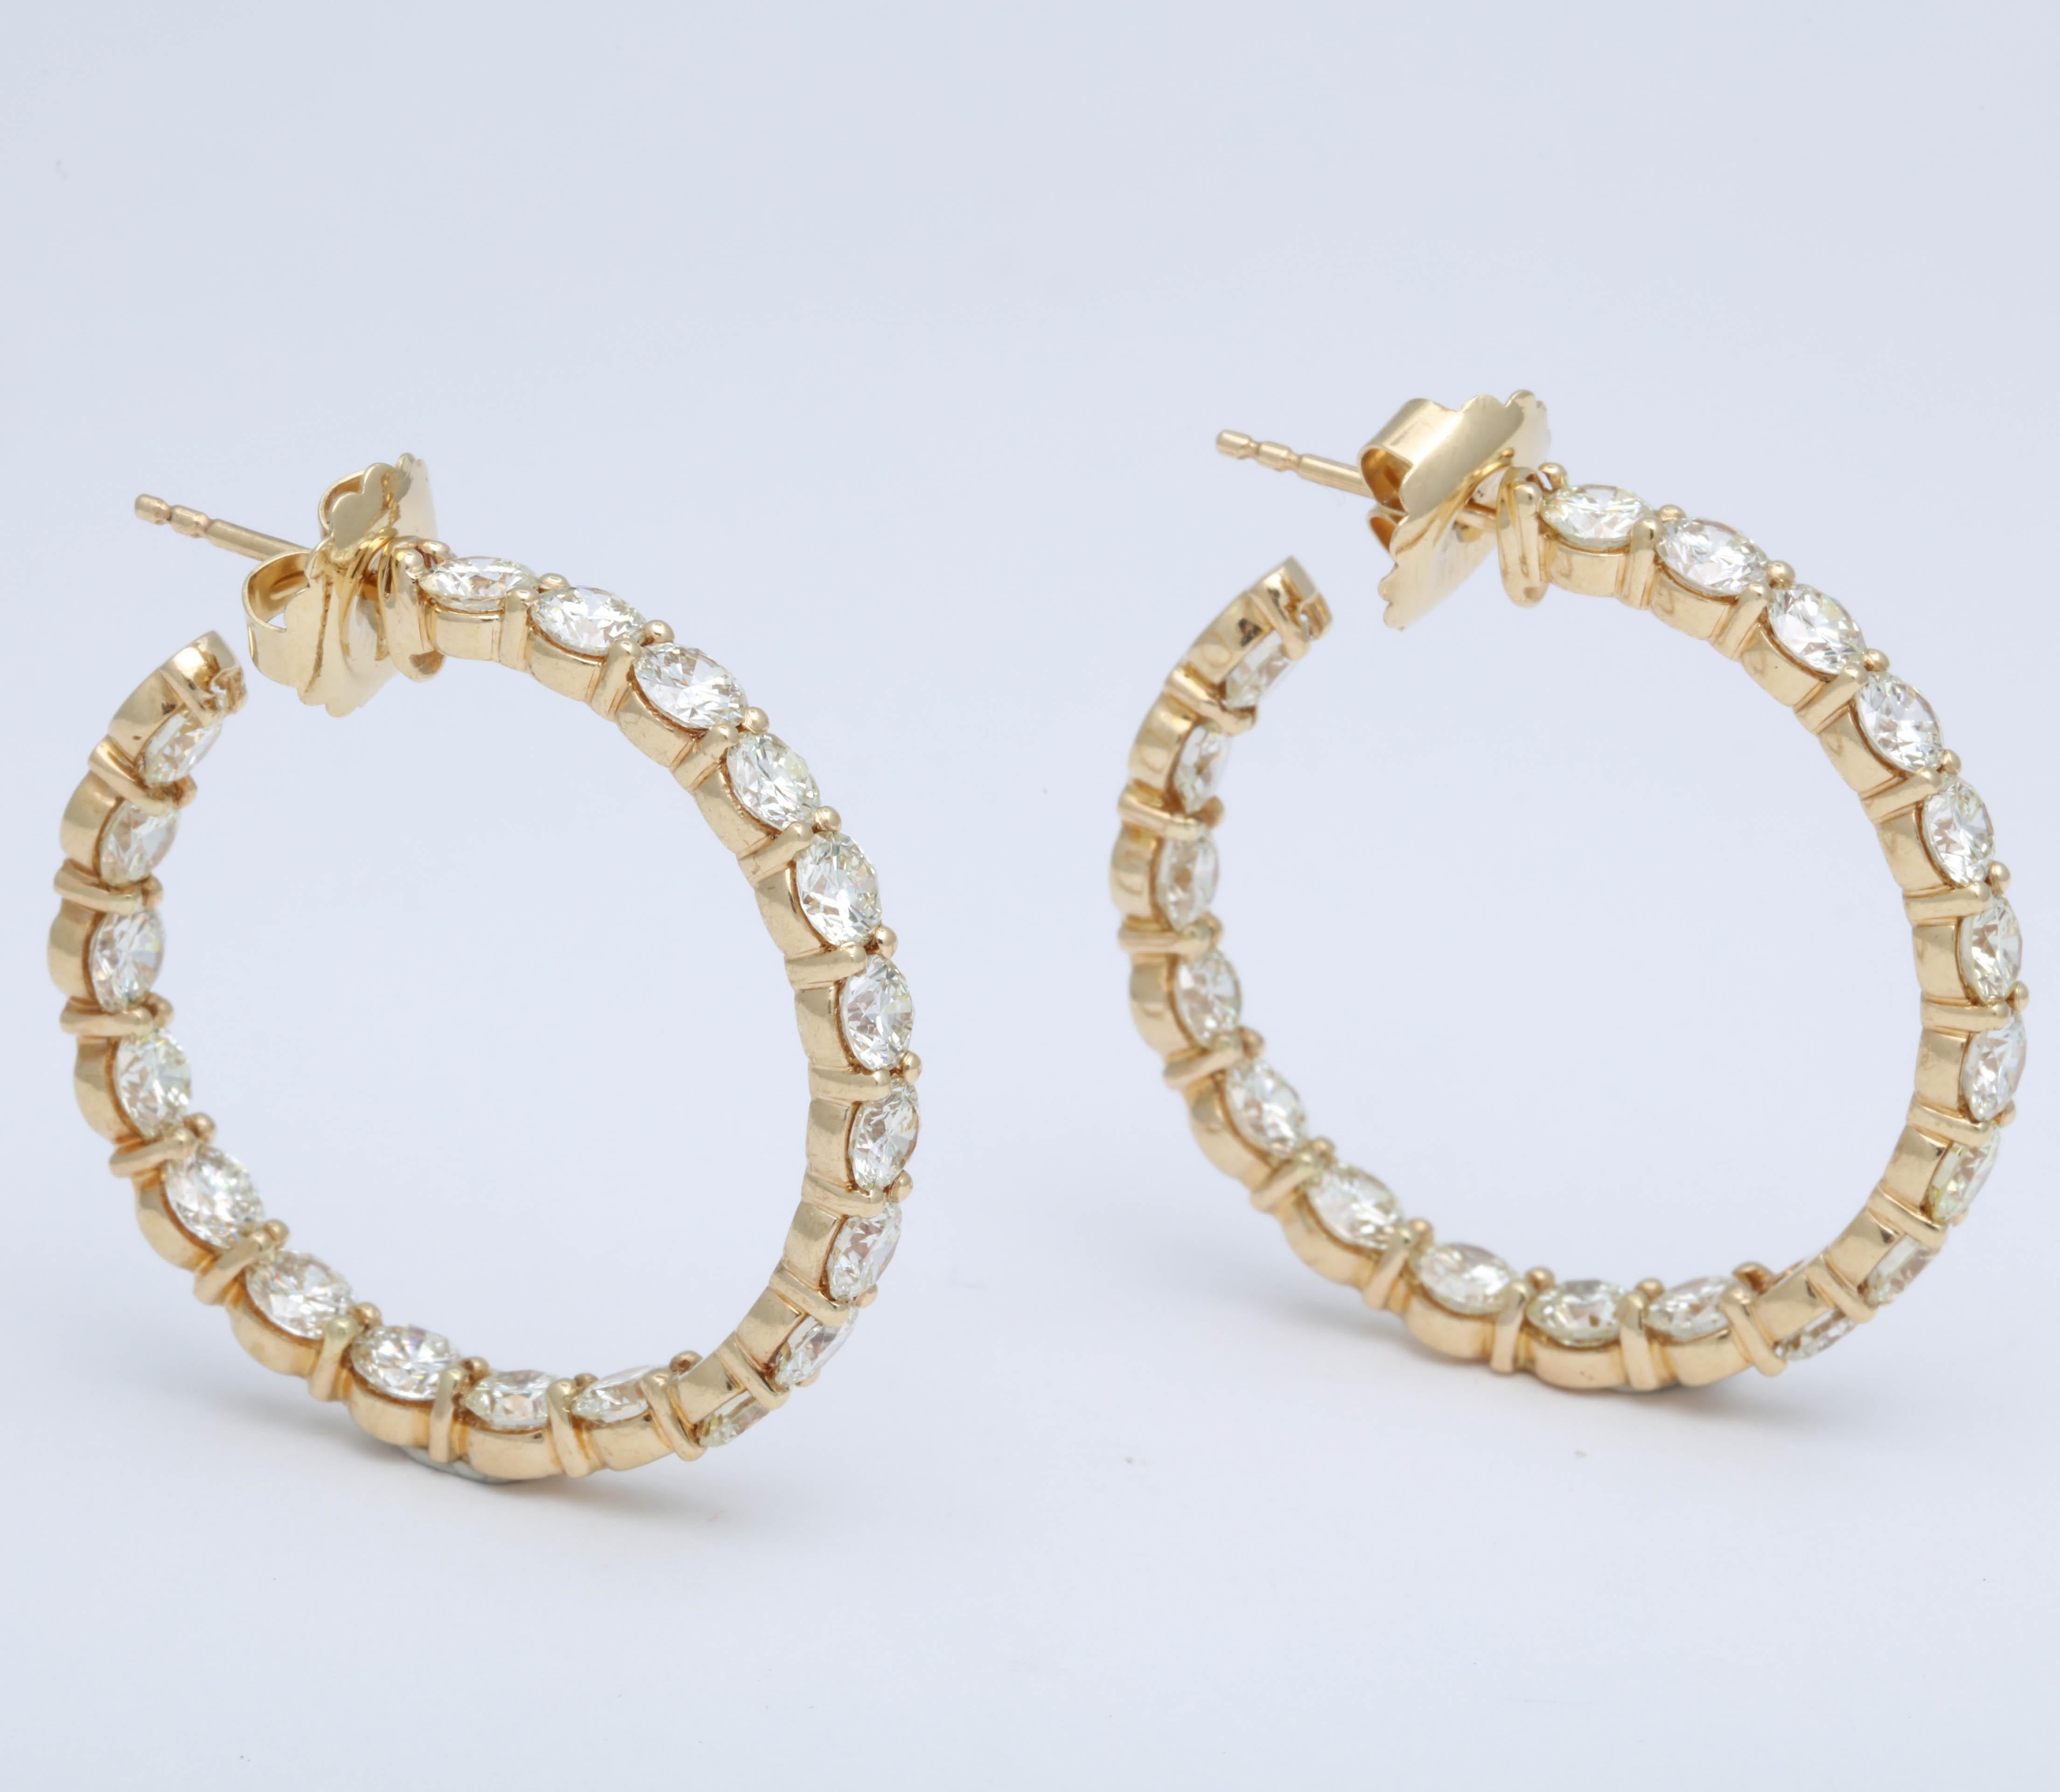 

An amazing pair of important Diamond Hoop Earrings with LARGE white diamonds!

13.20 carats of round brilliant cut white diamonds set in 18k yellow gold. 

Each diamond averages over 0.30 carats. 

The hoops were custom designed in New York --